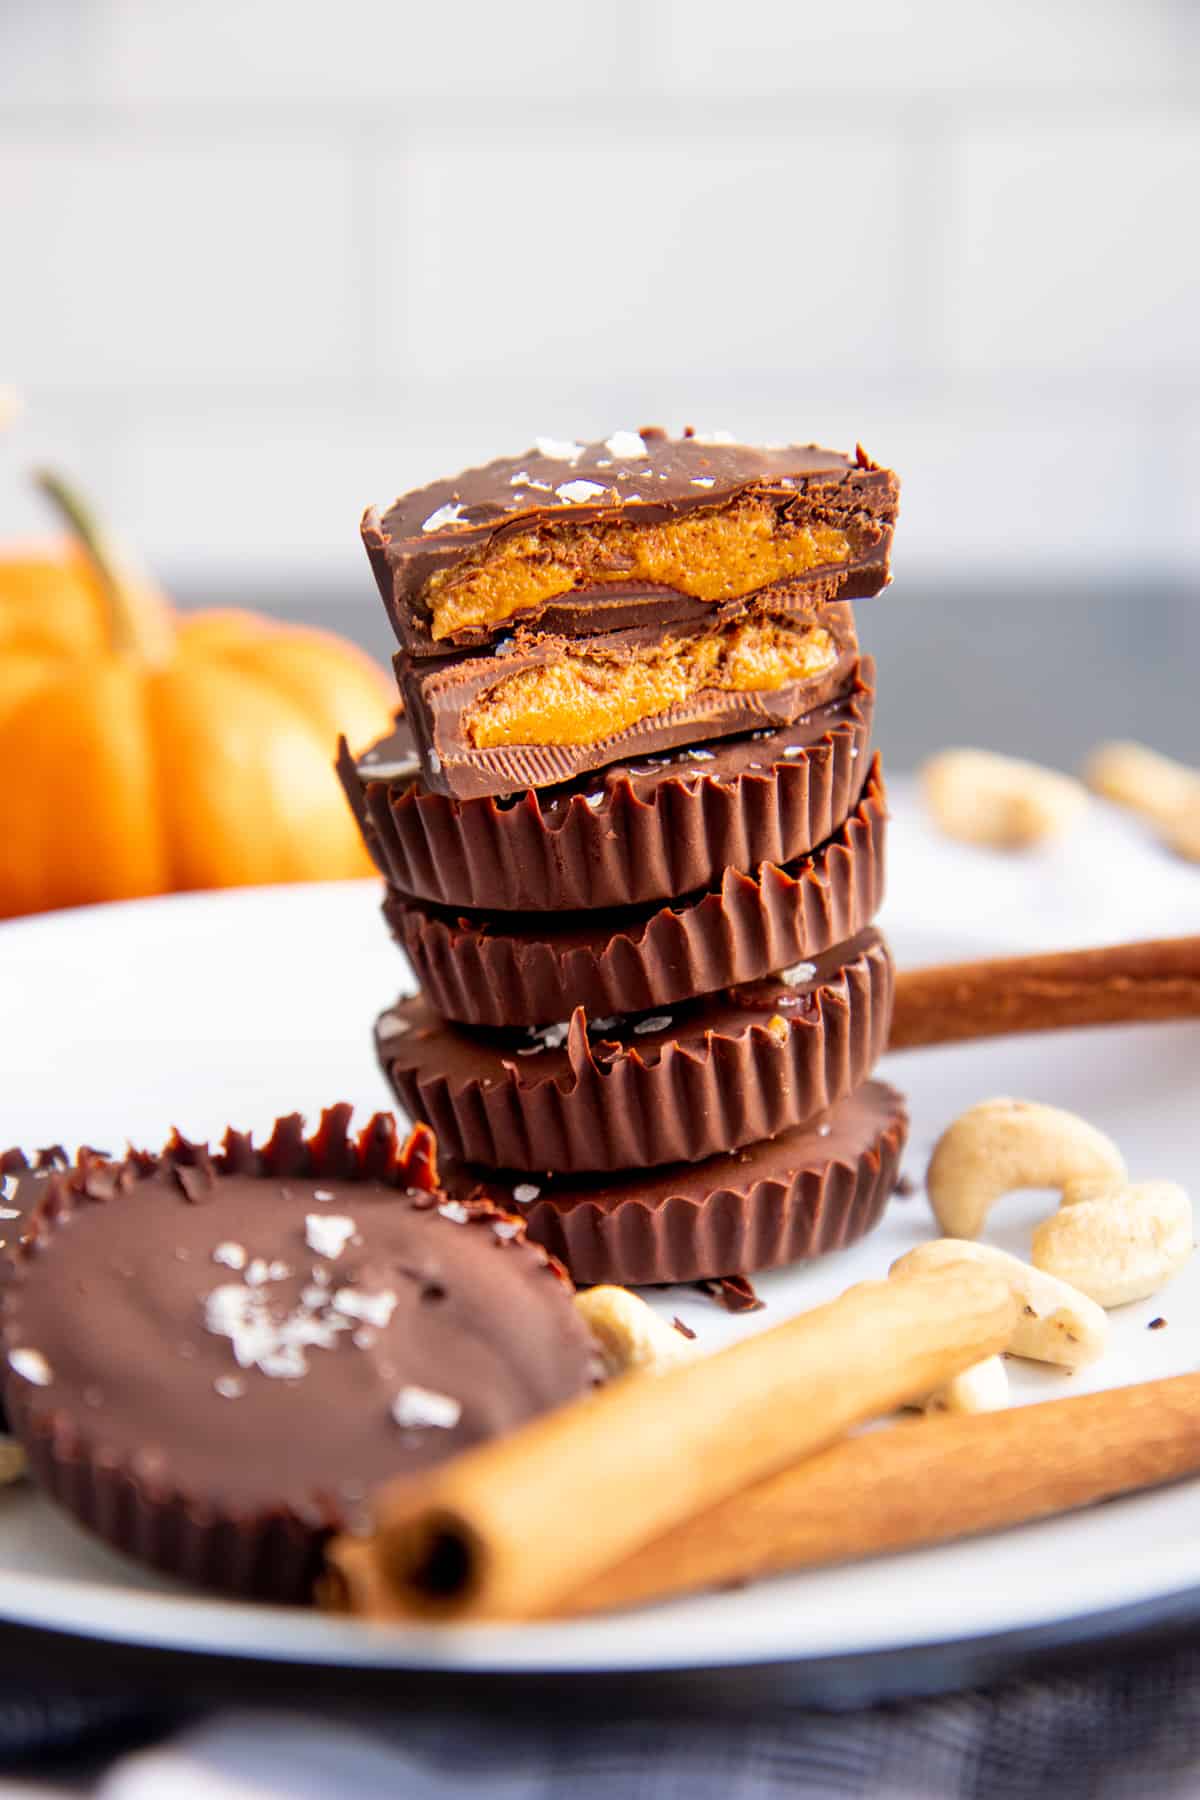 Stack of Pumpkin Spice Dark Chocolate Nut Butter Cups arranged on a white plate. One of the cups is cut in half to show the filling.